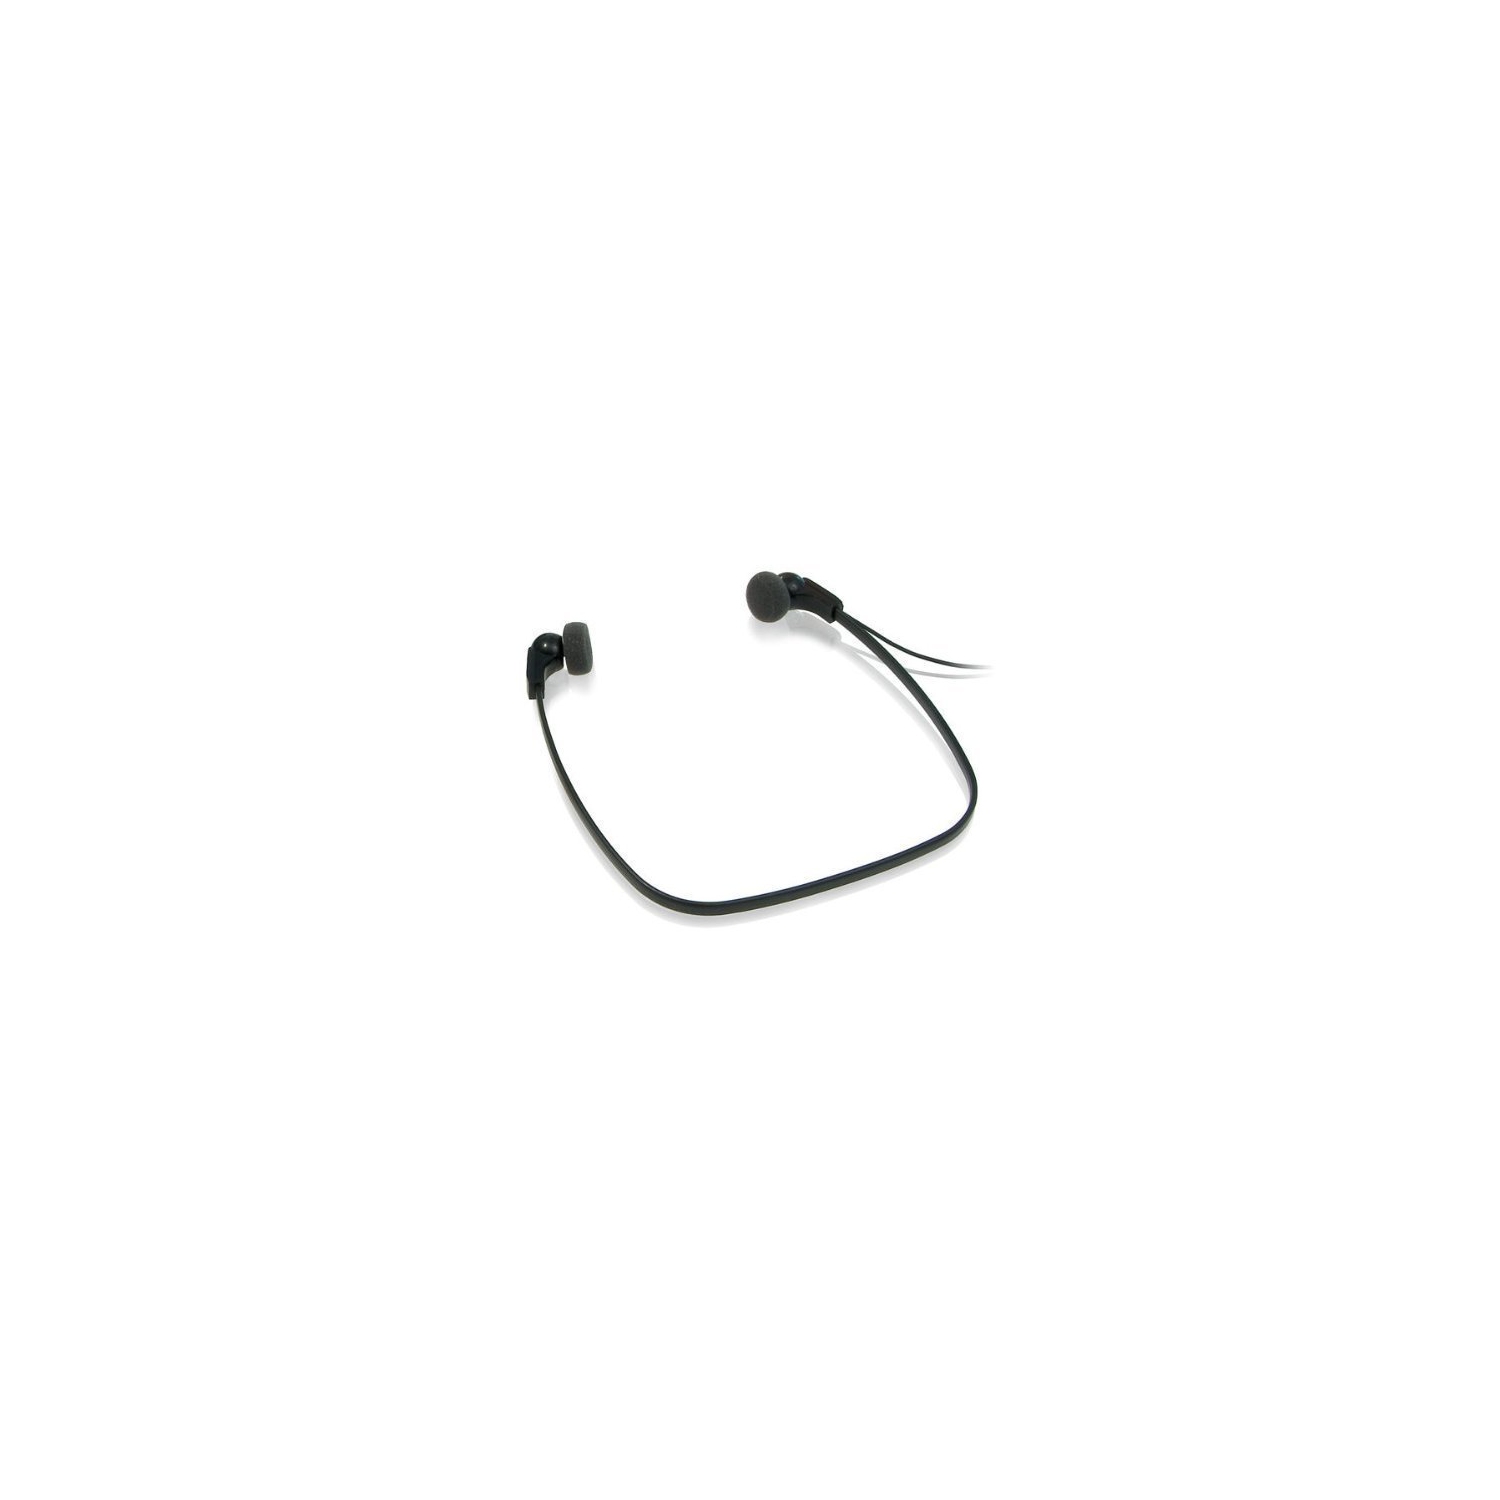 Philips Stereo Headphones LFH-334 Under-the-Chin Style Stereo Headset for All Philips Desktops